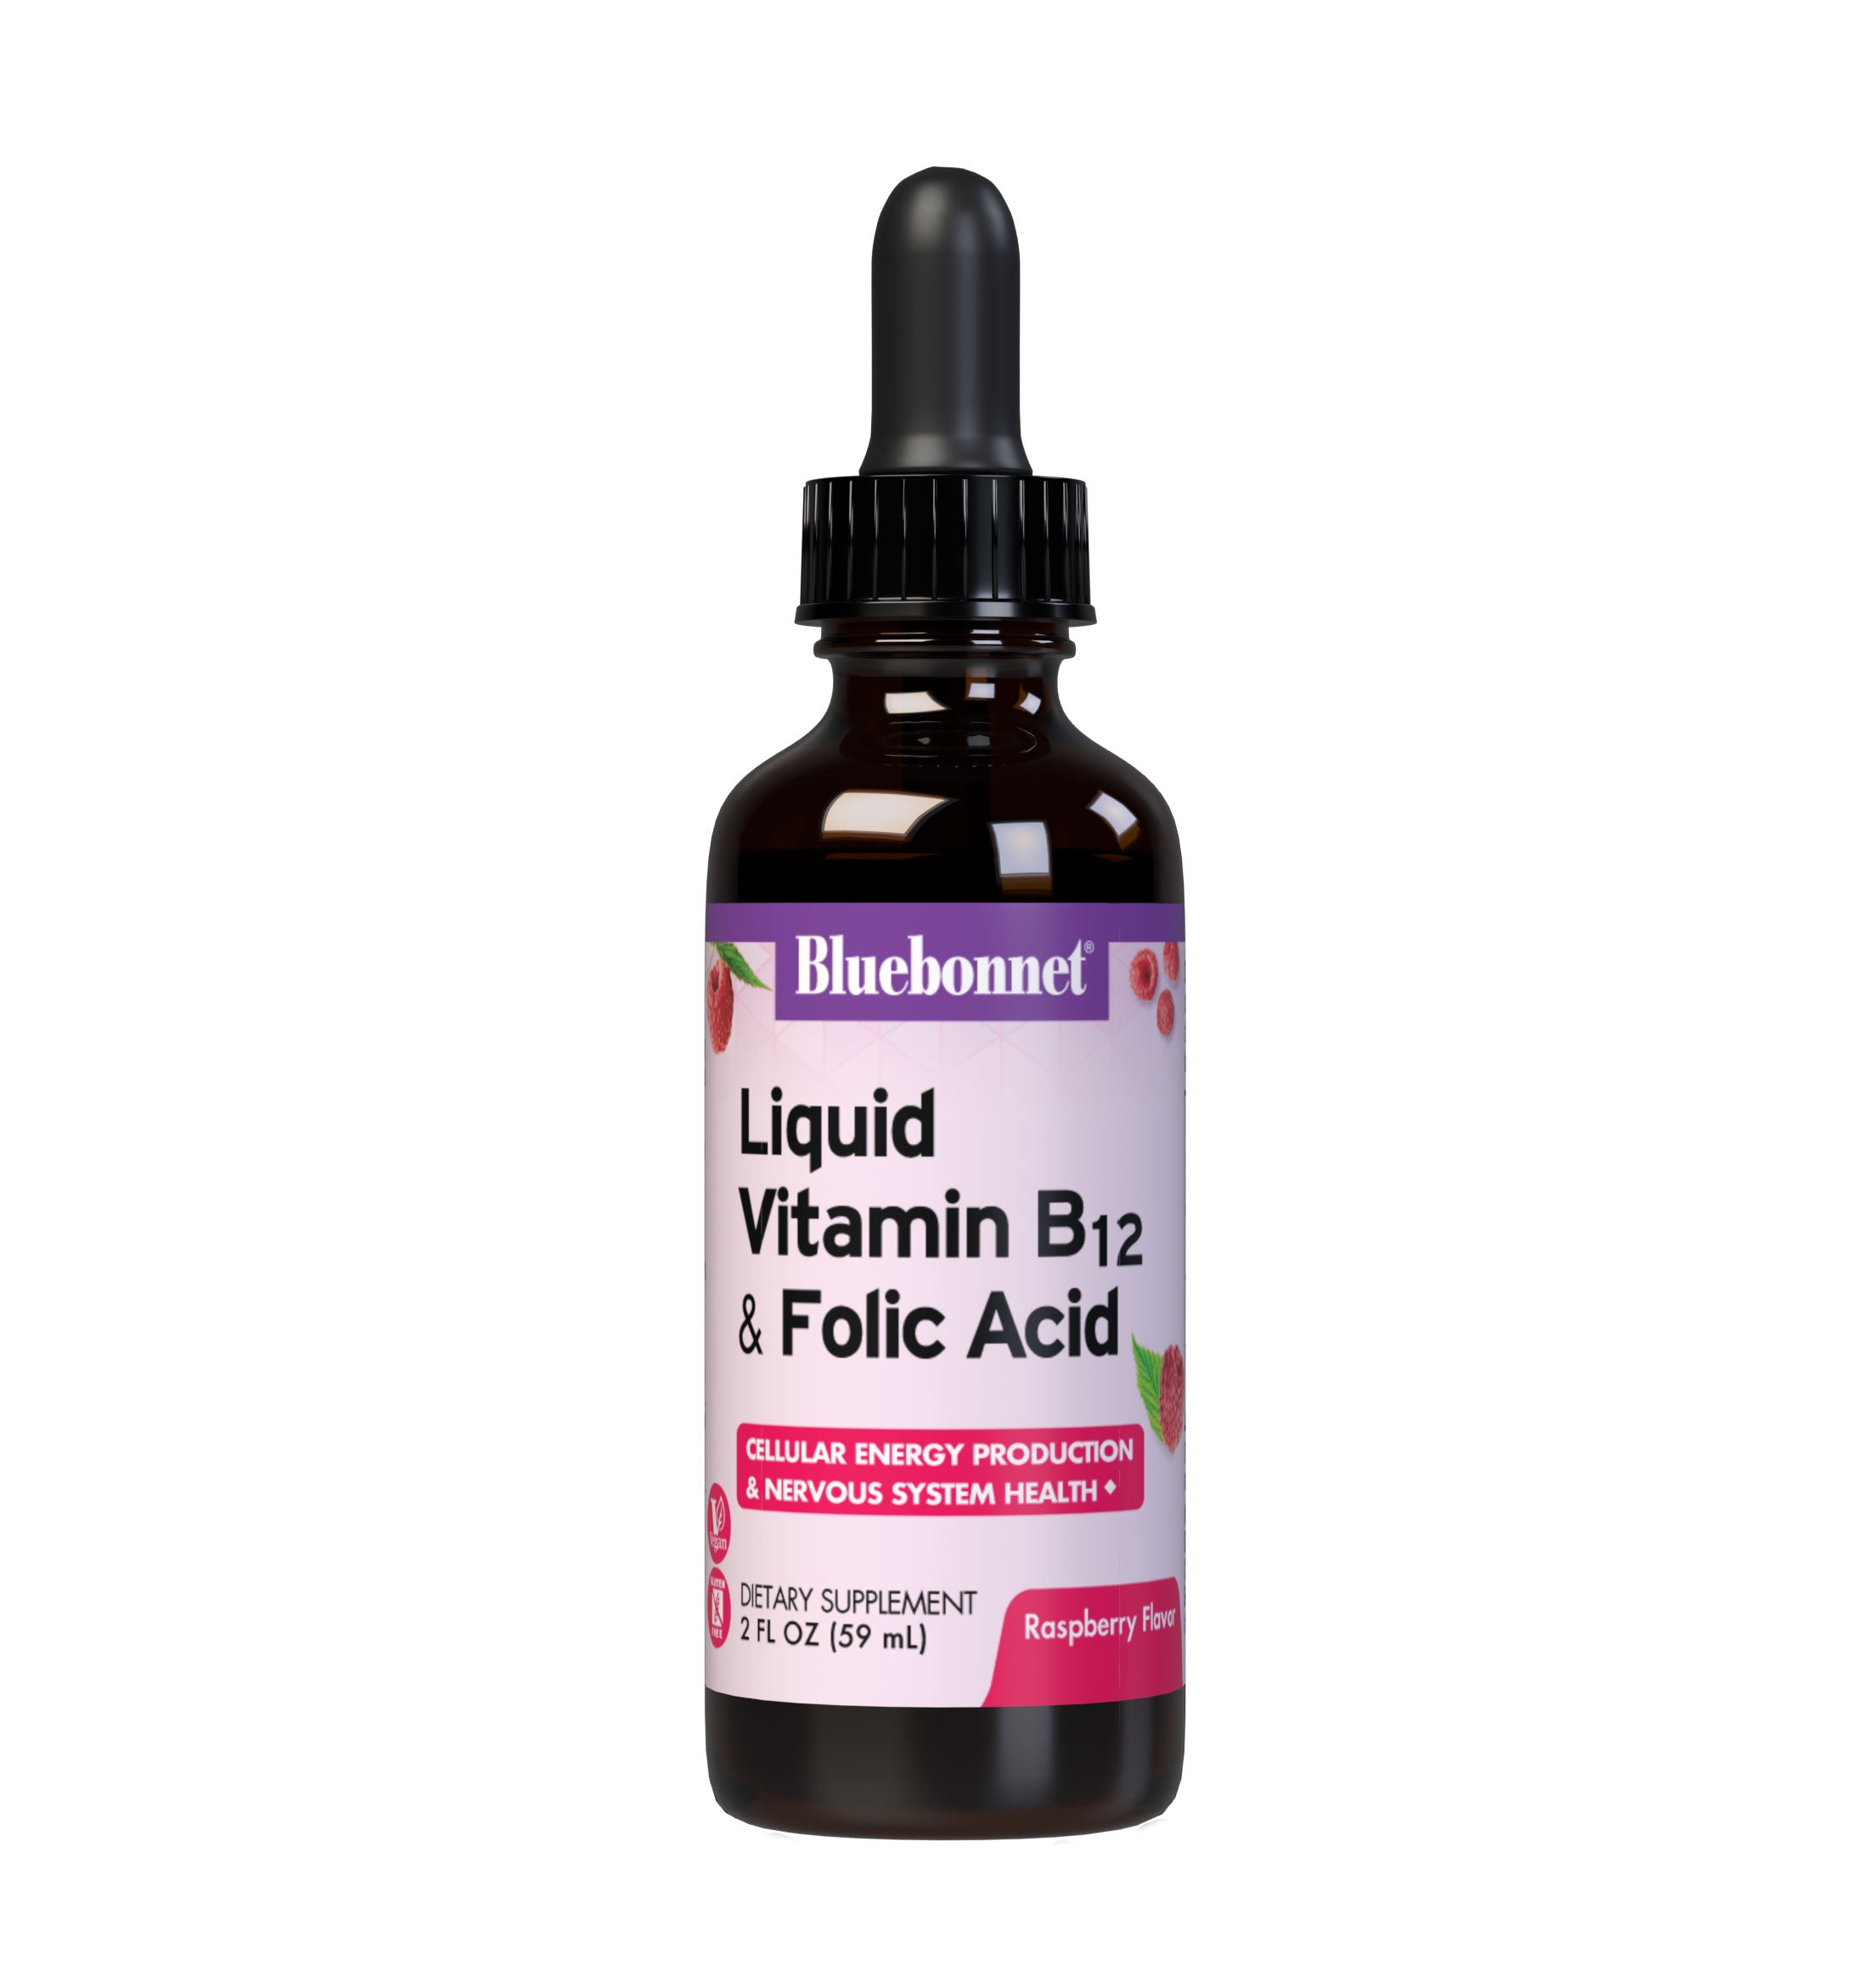 Bluebonnet’s Liquid Vitamin B12 & Folic Acid are formulated with fast-acting vitamin B12 and folic acid that supports cellular energy production and nervous system health. #size_2 fl oz